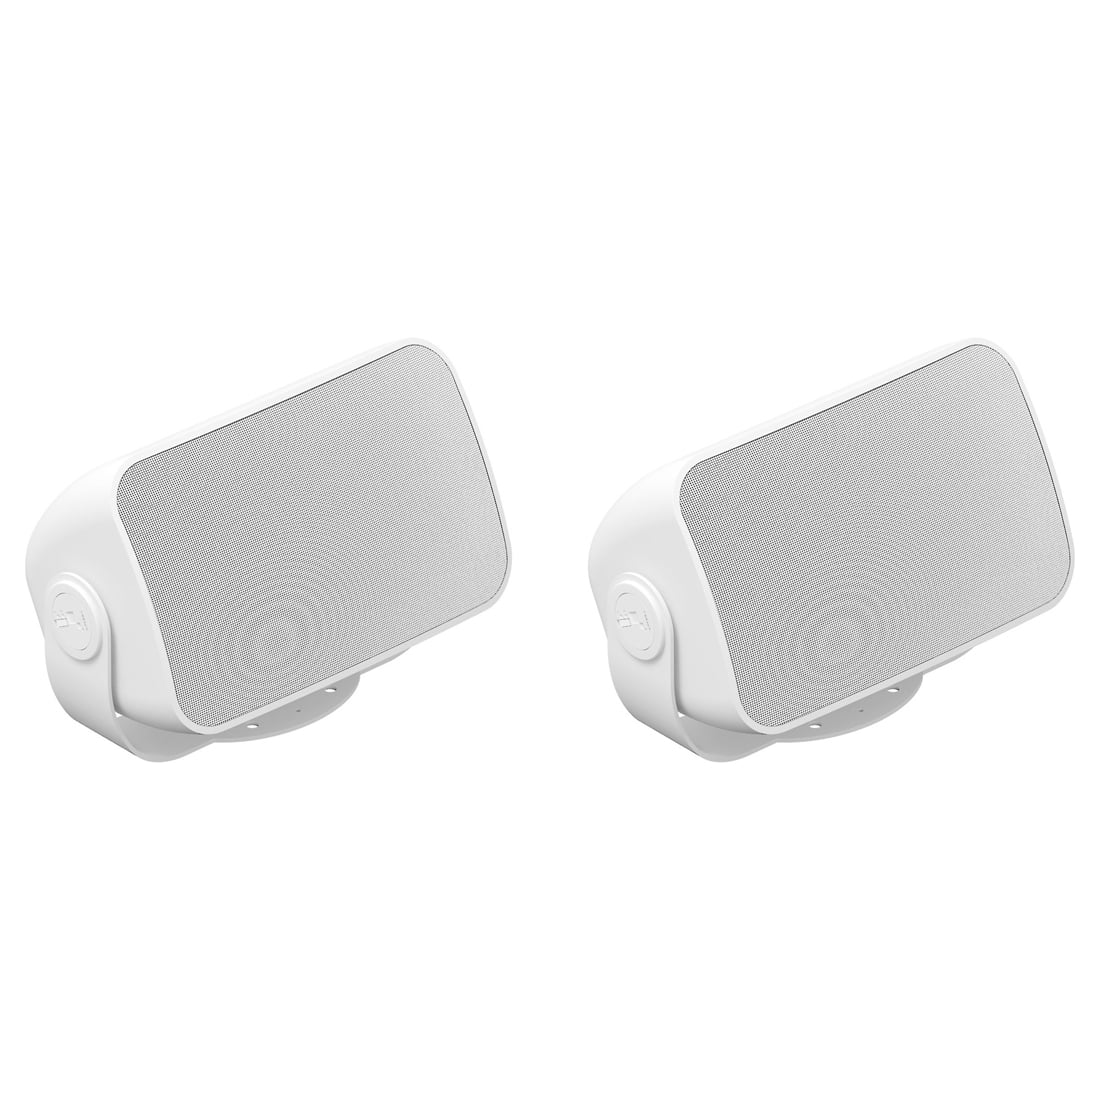 Sonos Outdoor By Sonance Speakers – Pair - White